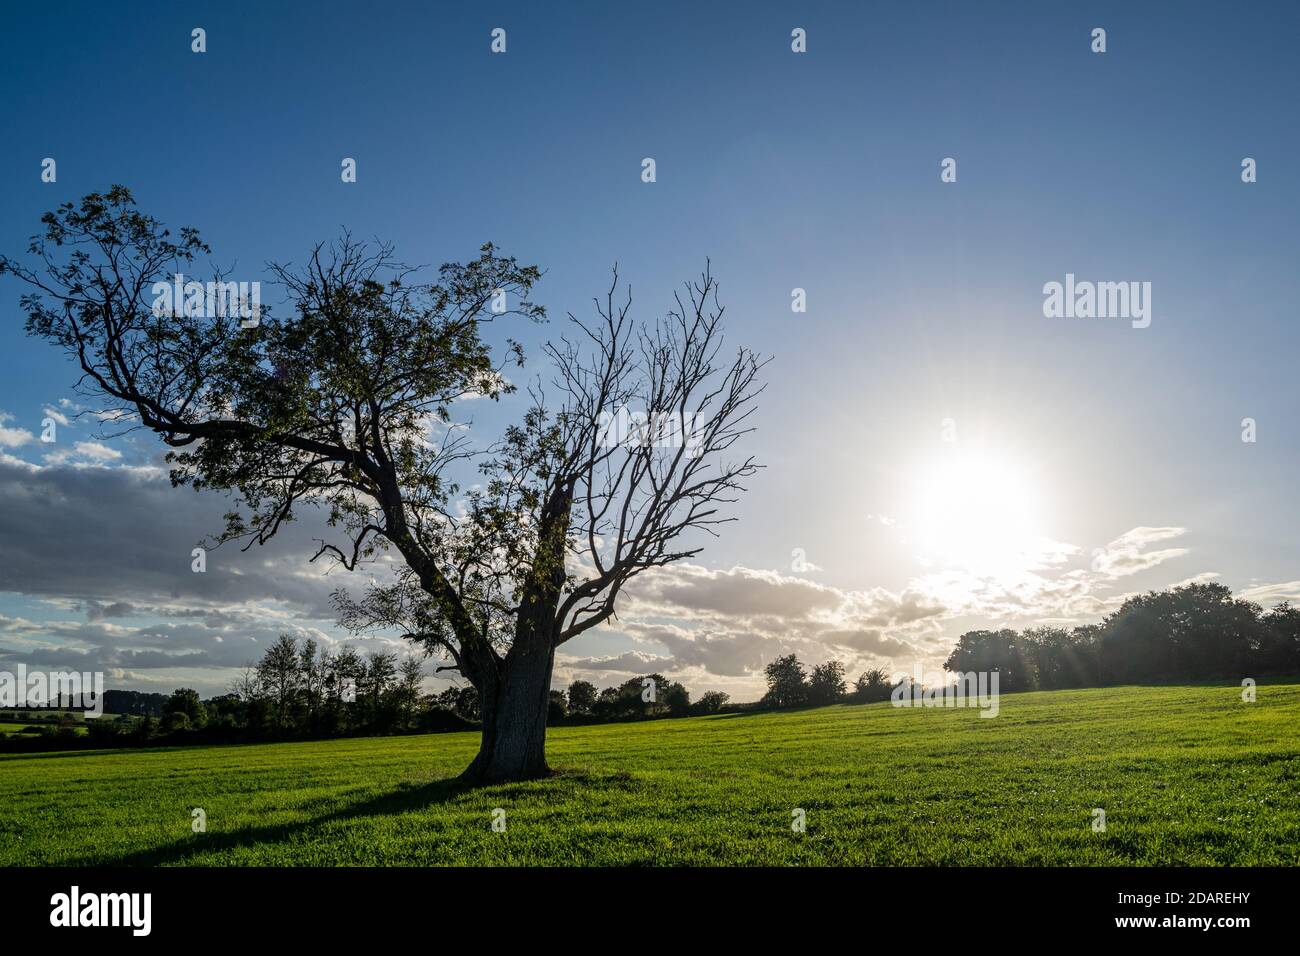 Huge lonely isolated tree on an agricultural field, nature in decline due to exploitation by agriculture, last one tree standing on farmland. Stock Photo